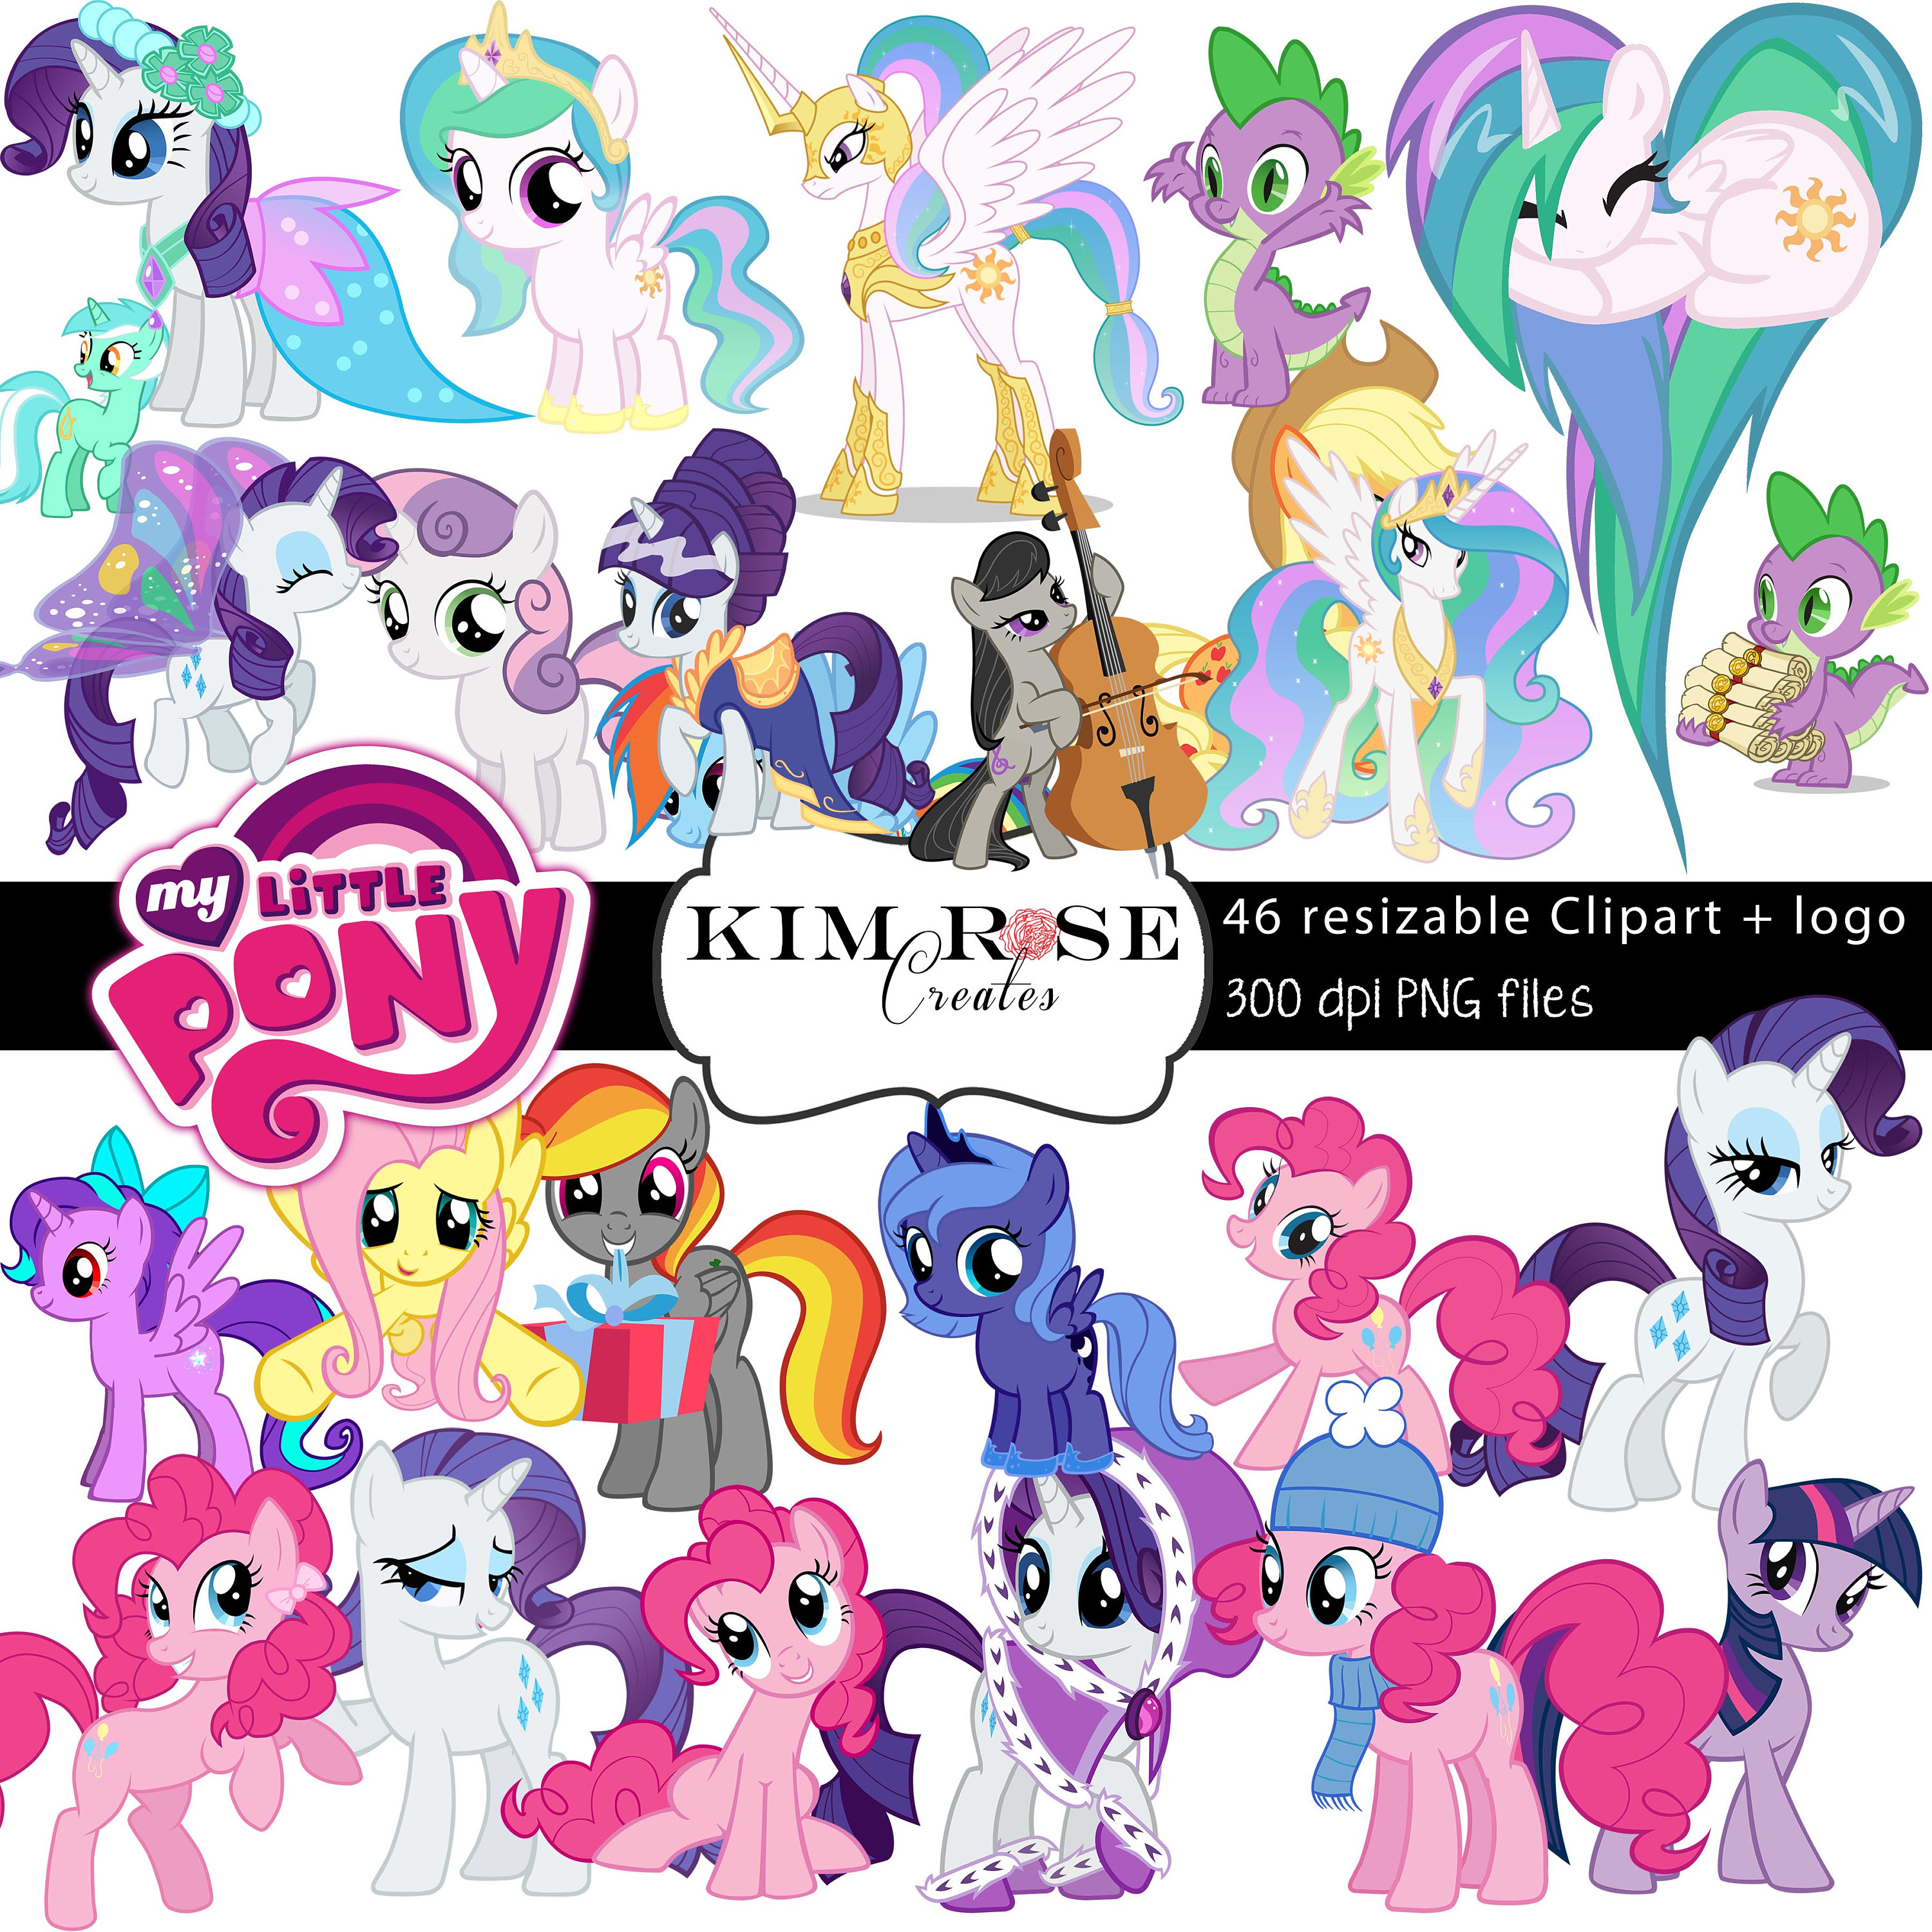 Little Pony Clipart at GetDrawings.com.